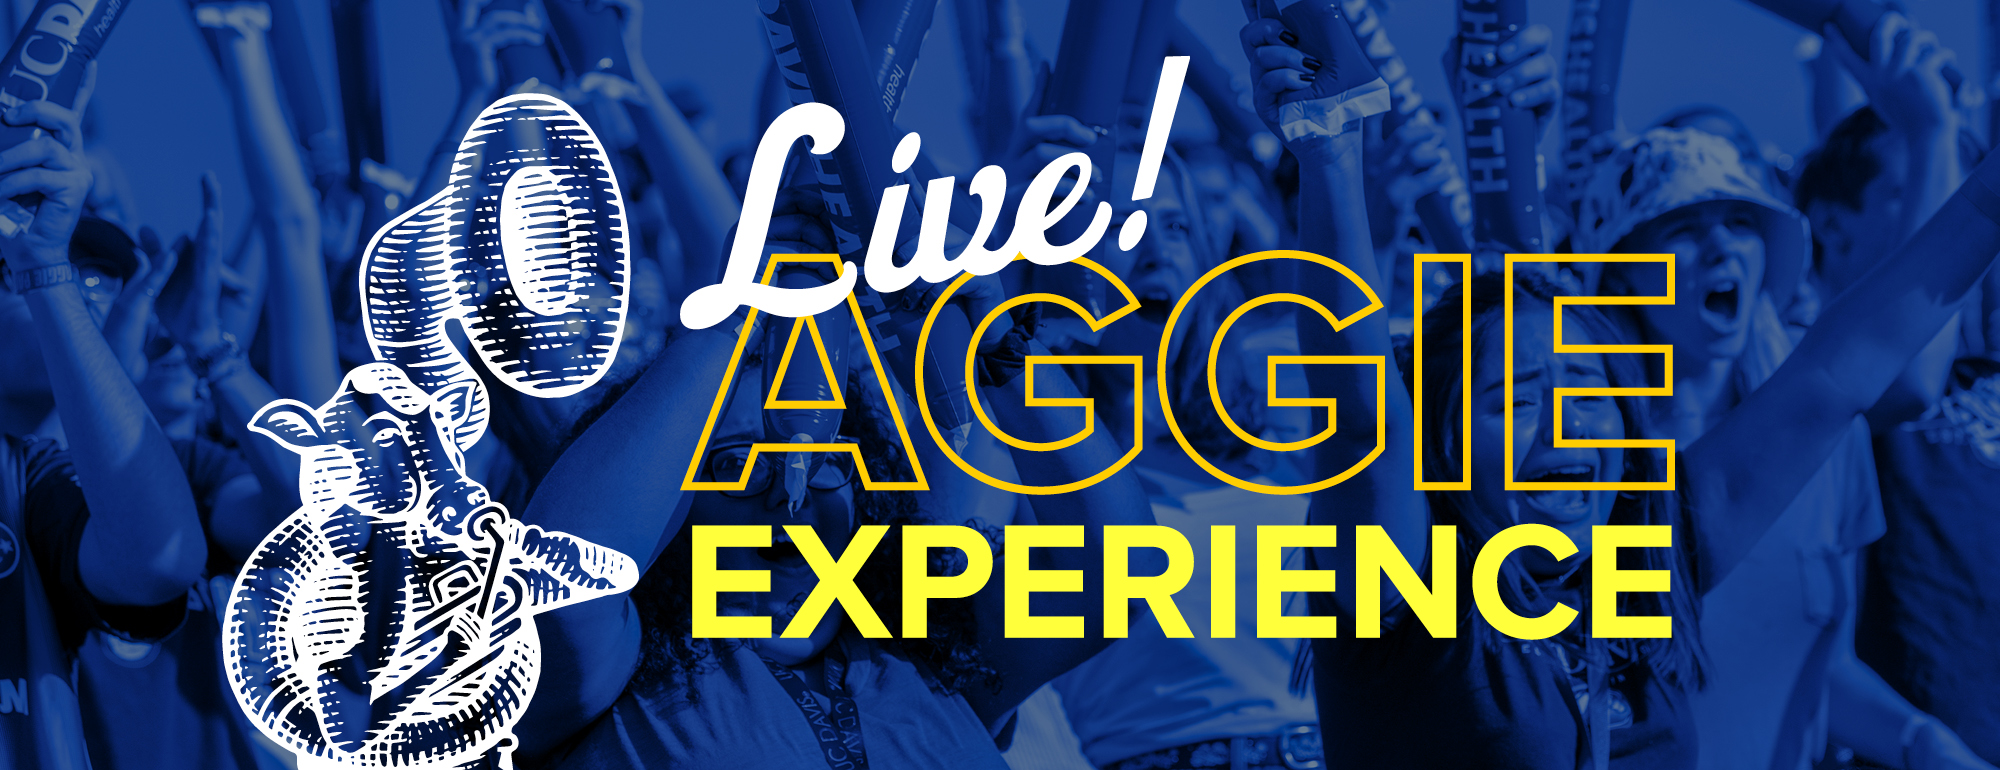 Aggie Experience Live!